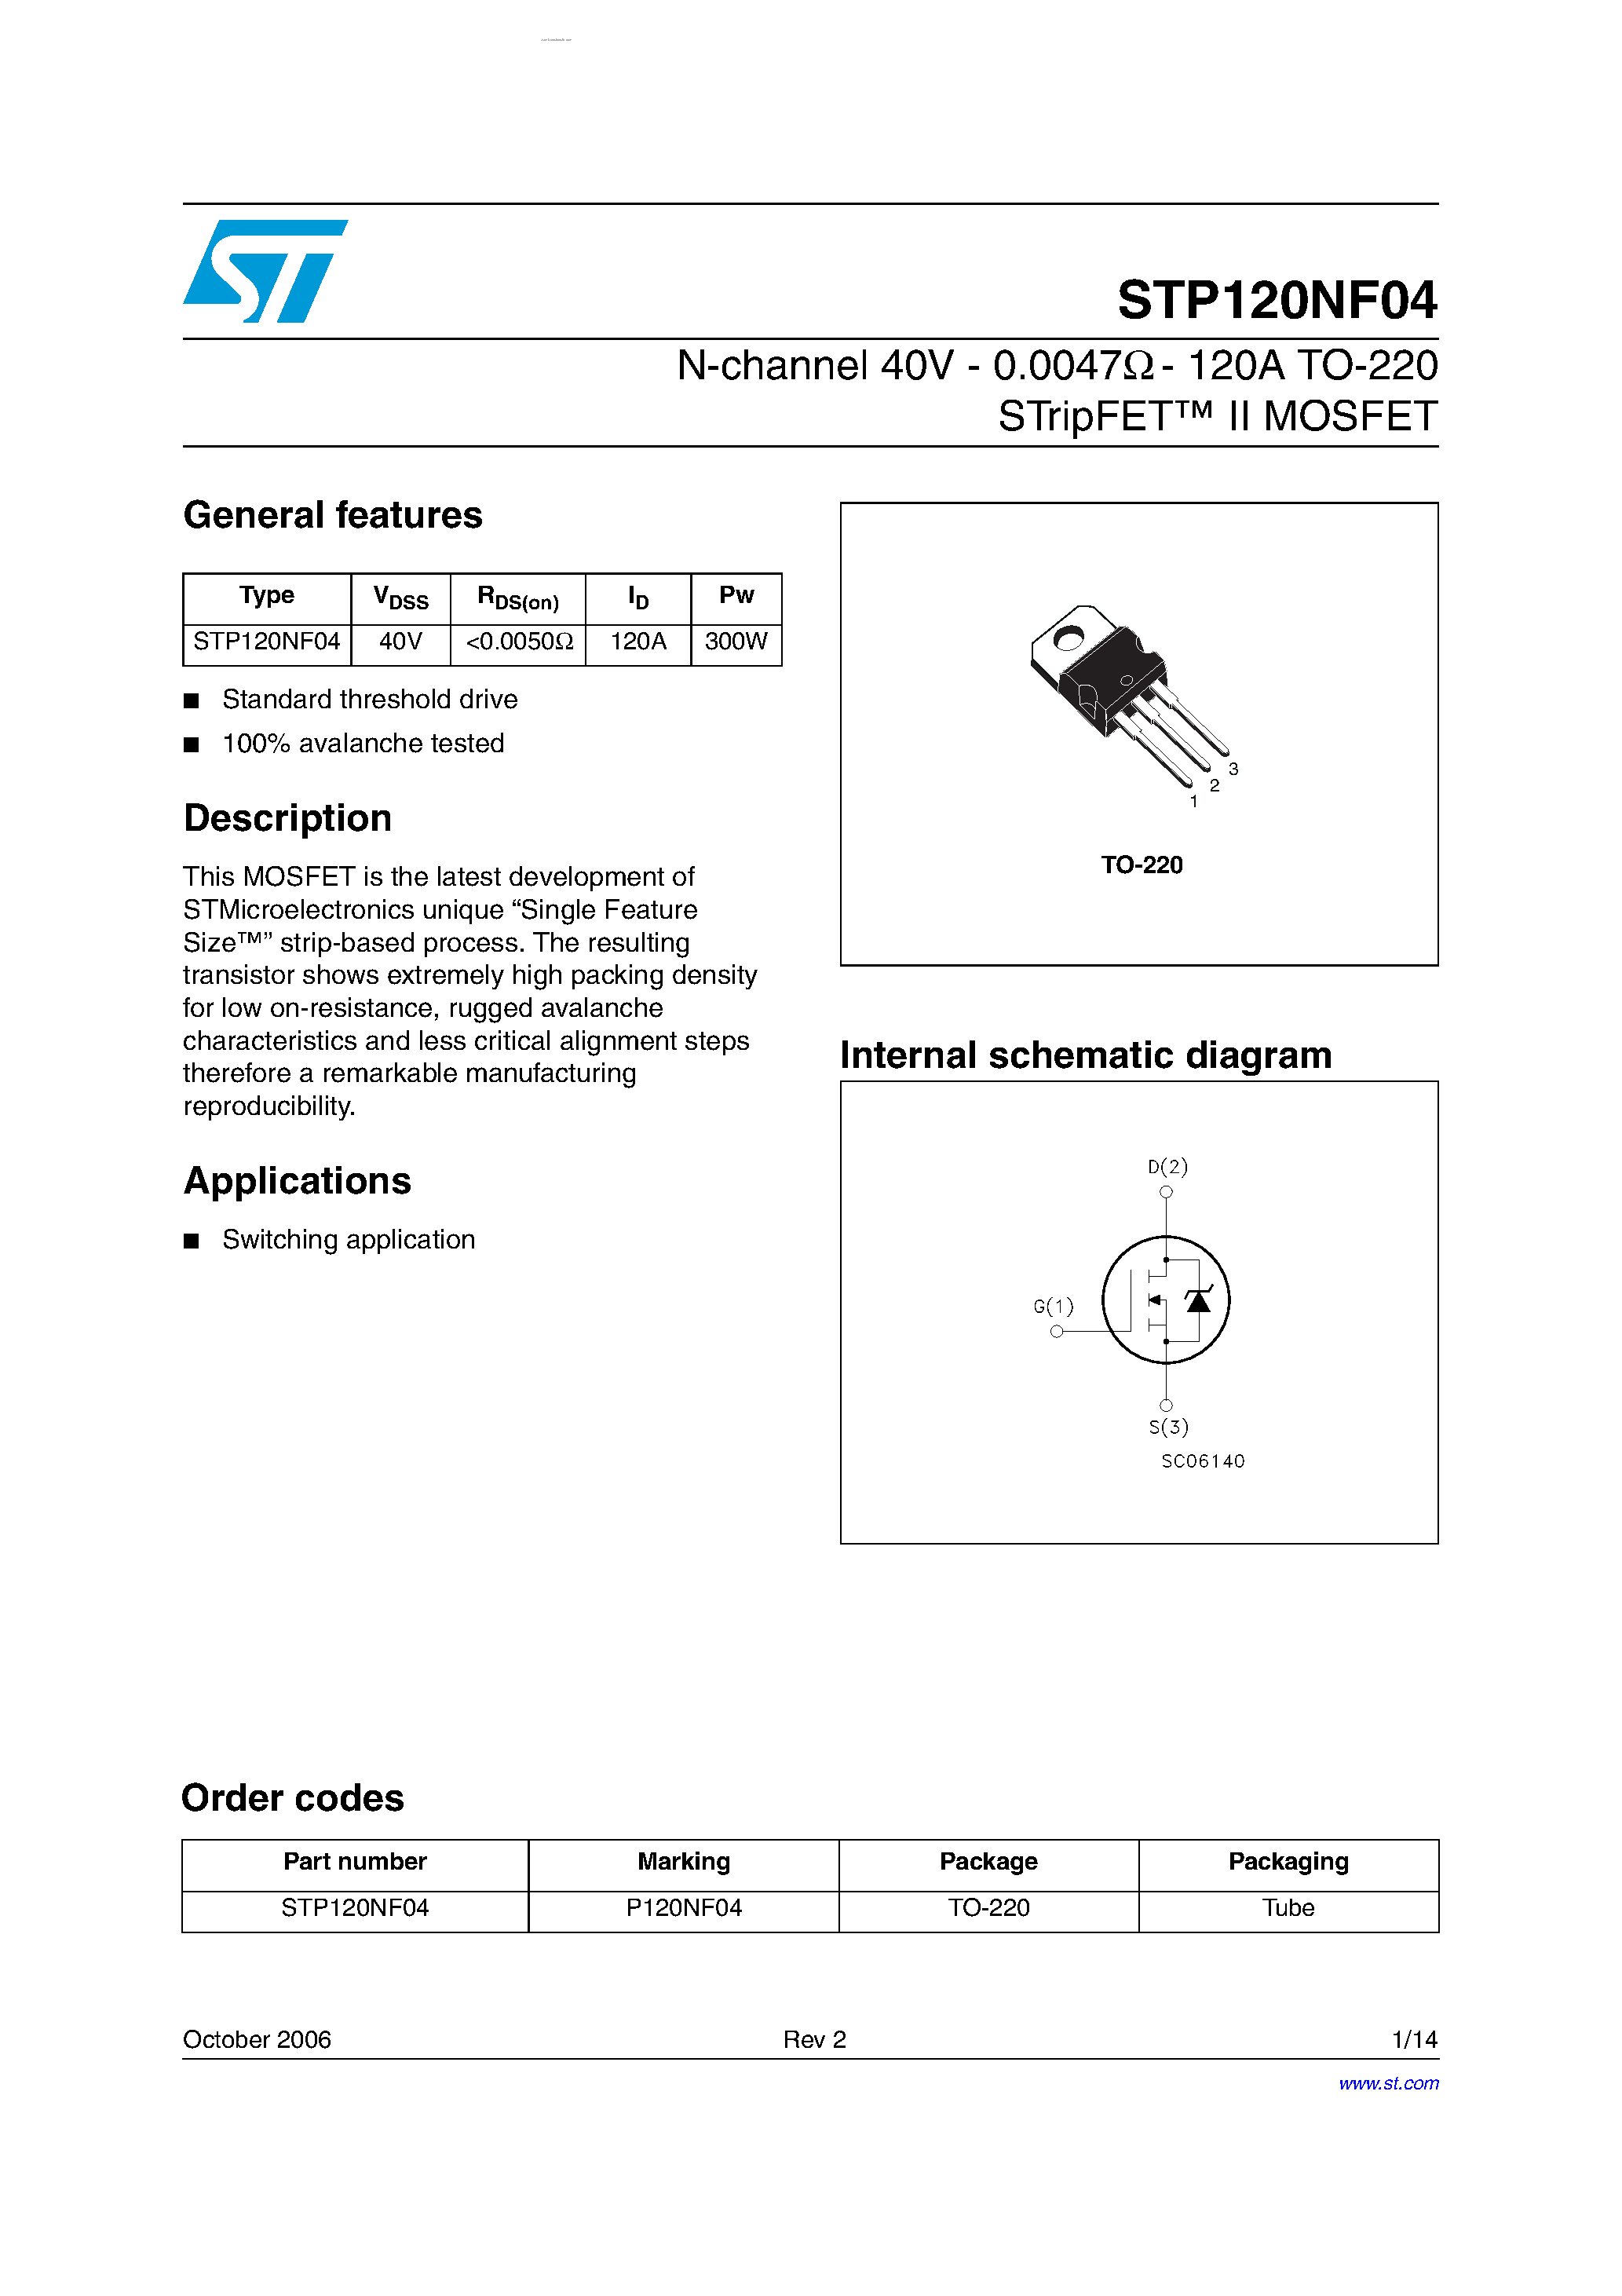 Datasheet STP120NF04 - N-CHANNEL POWER MOSFET page 1